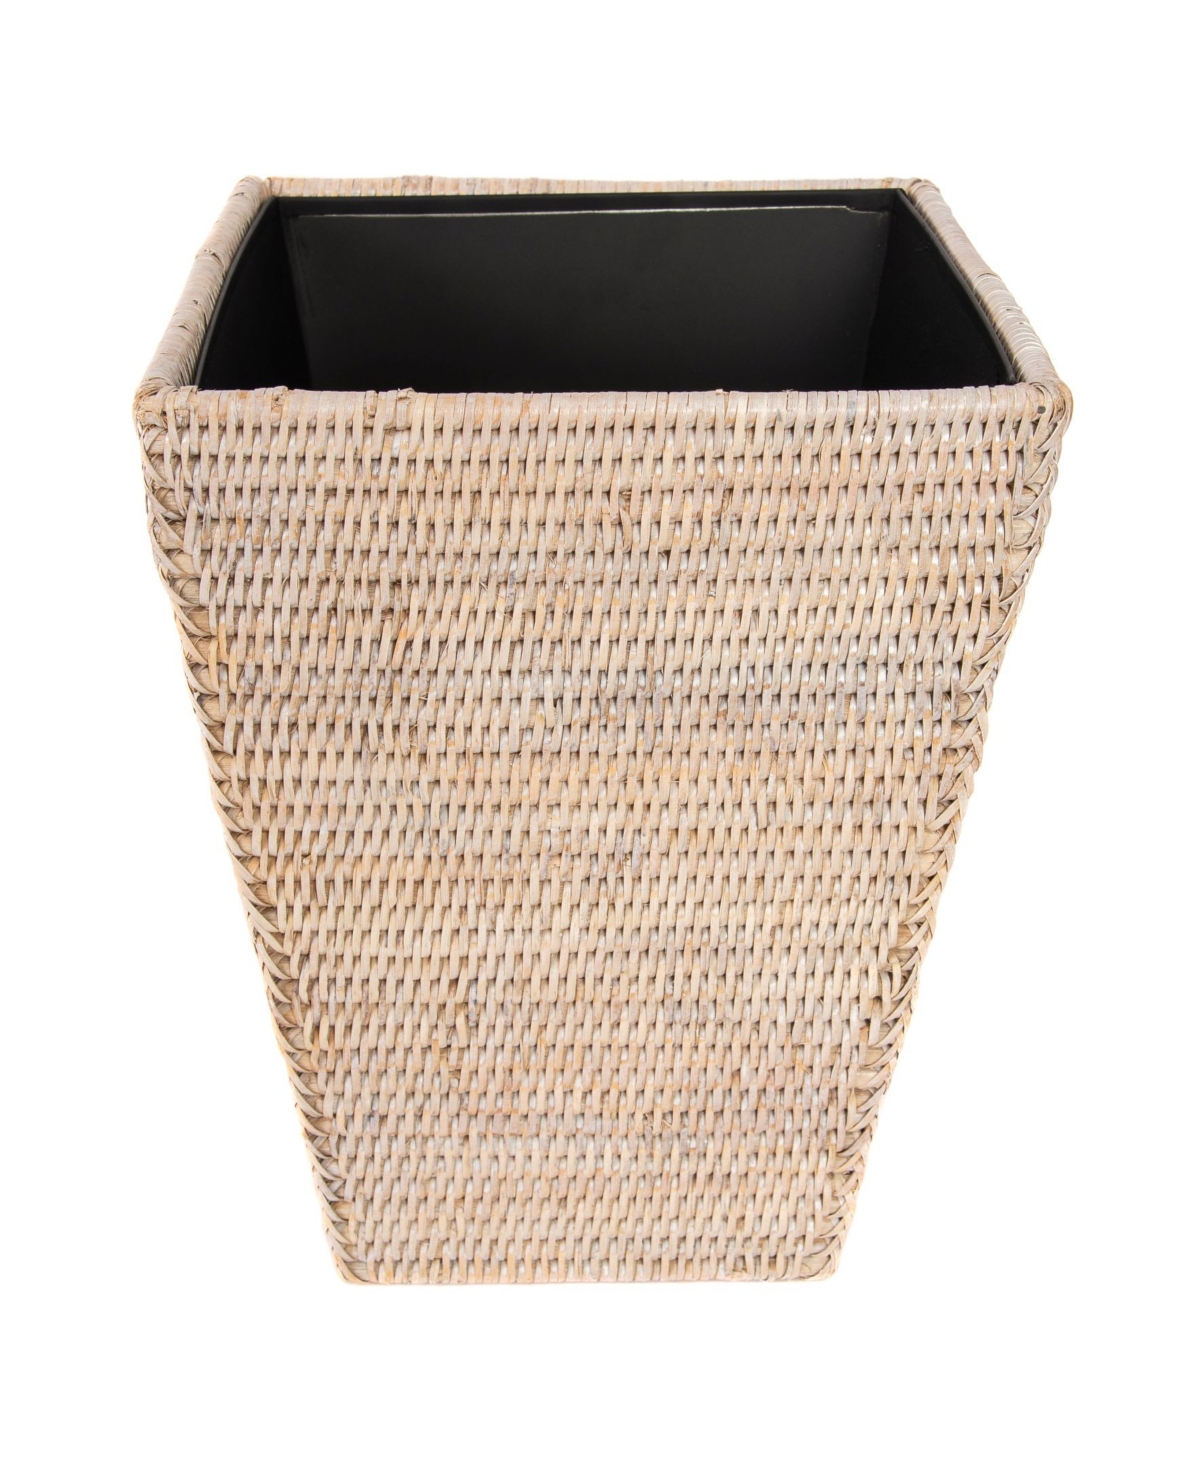 Shop Artifacts Trading Company Artifacts Rattan Square Tapered Waste Basket In Open White